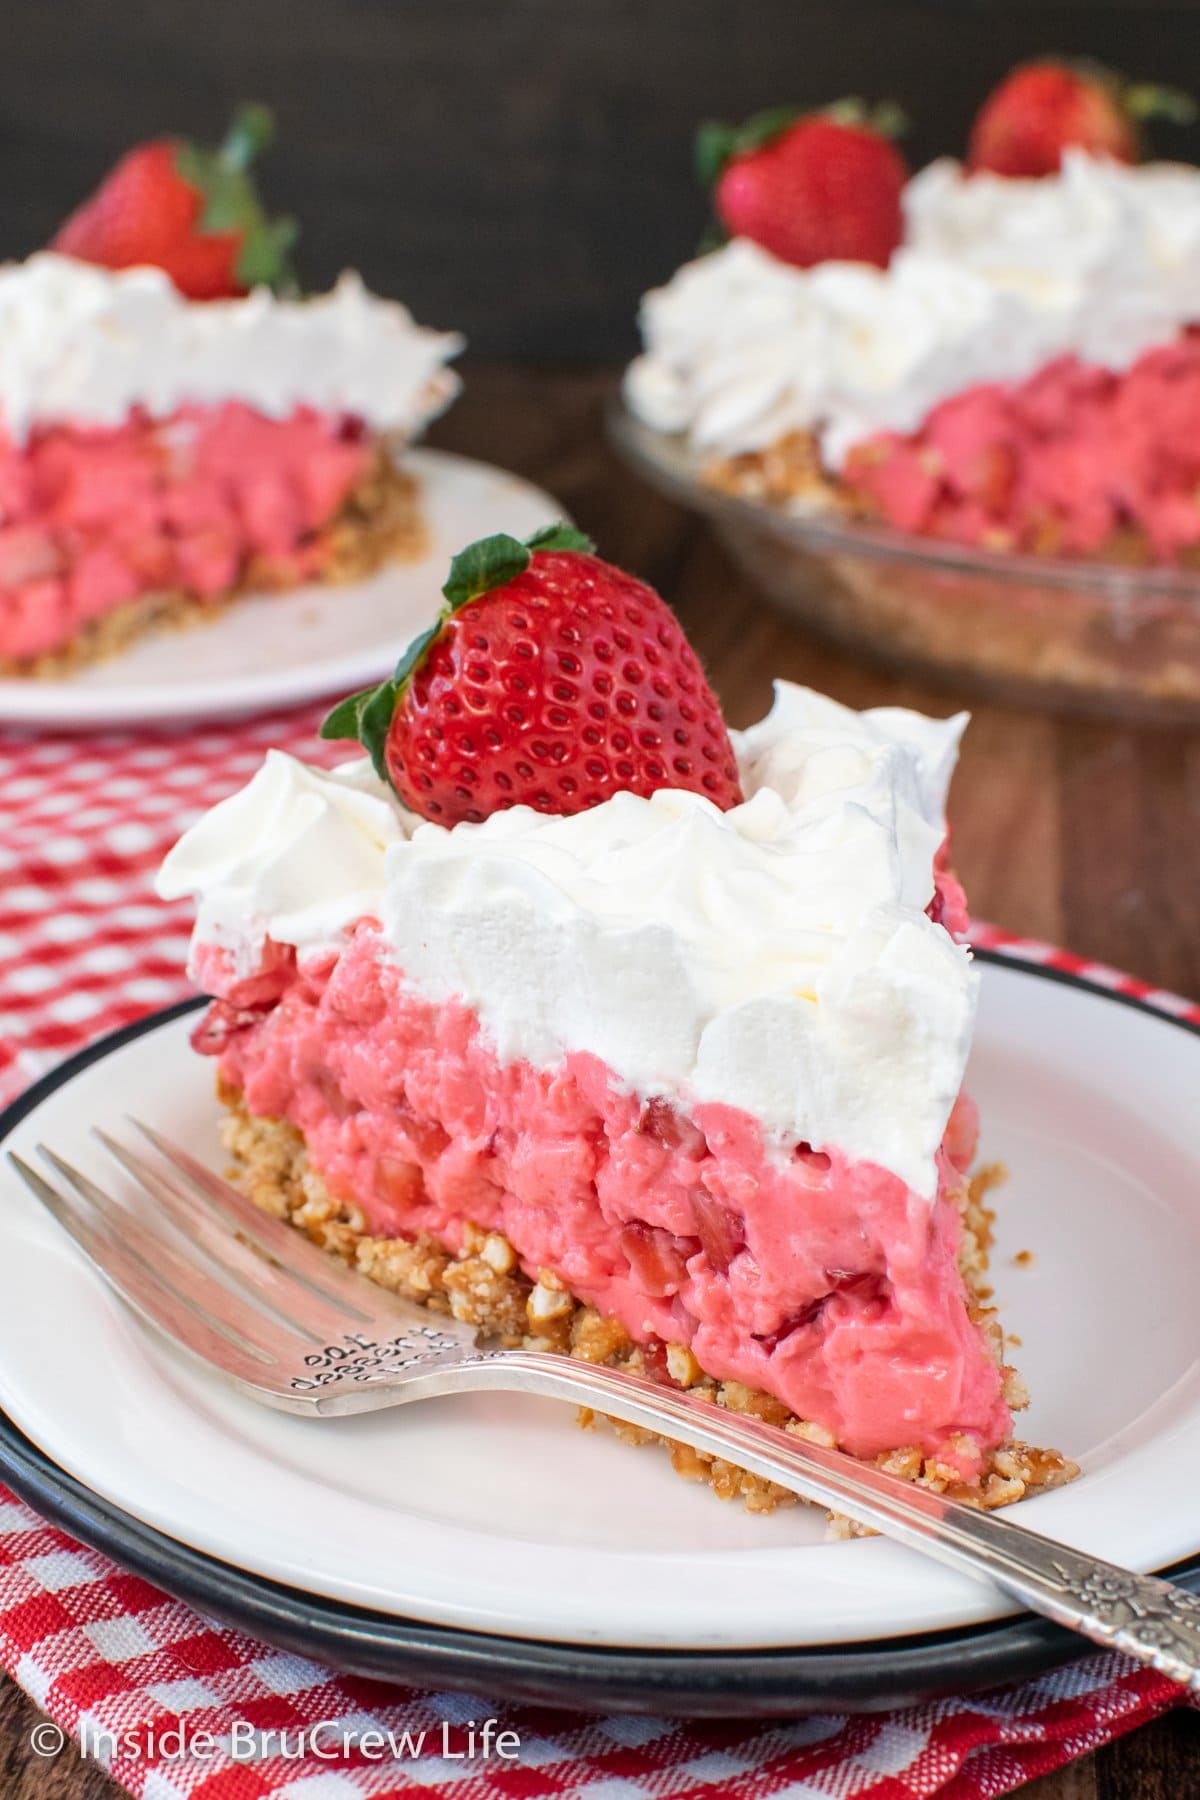 A slice of creamy pink Jello pie on a white plate.